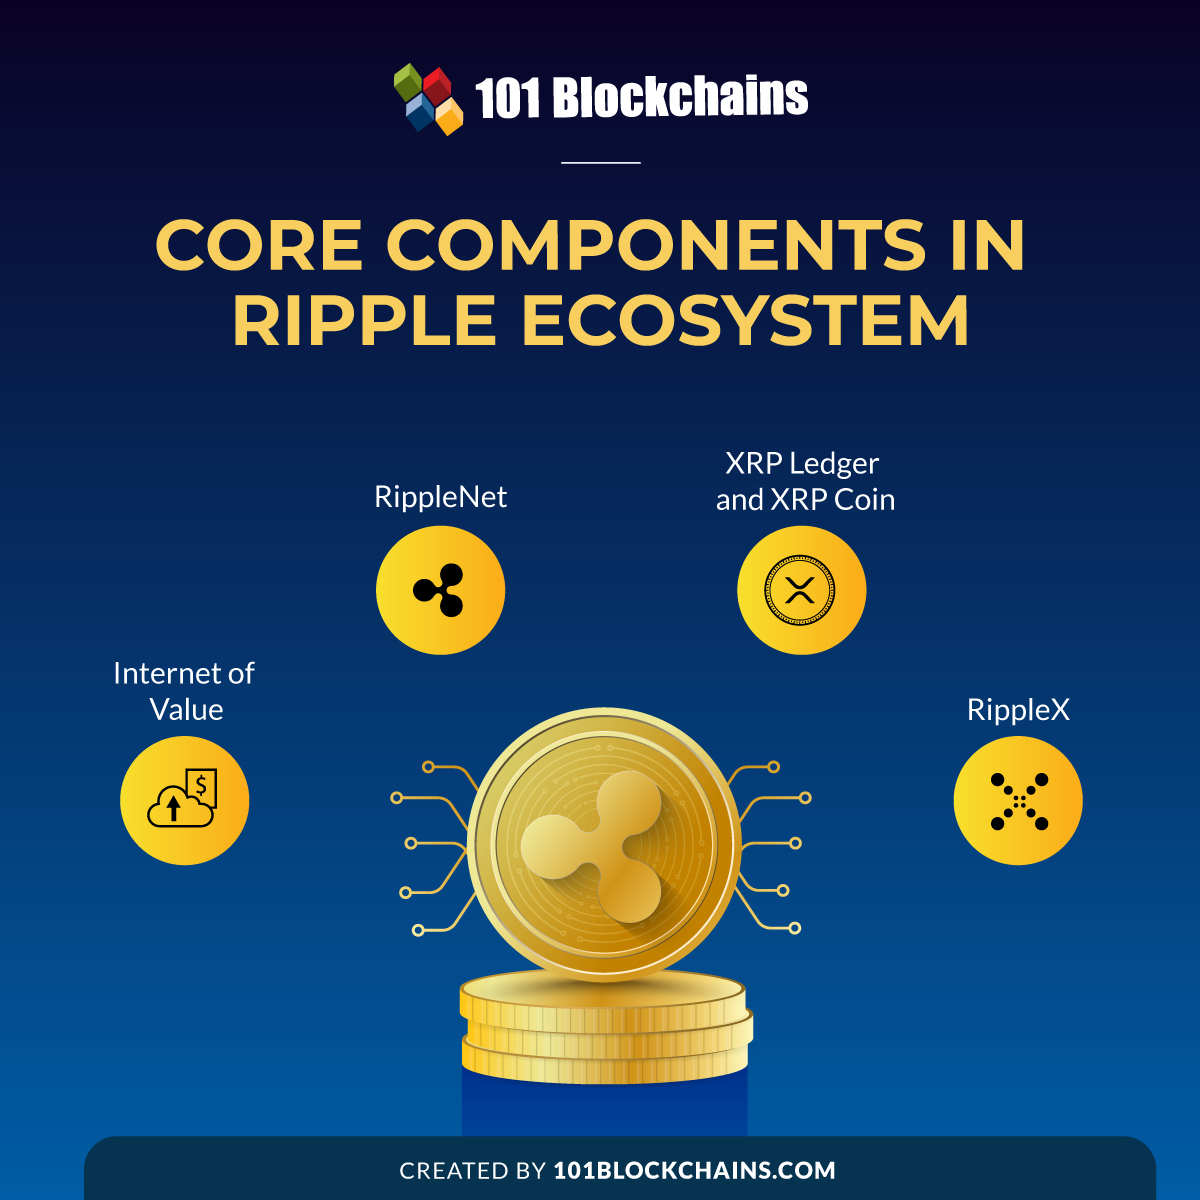 Core Components in Ripple Ecosystem